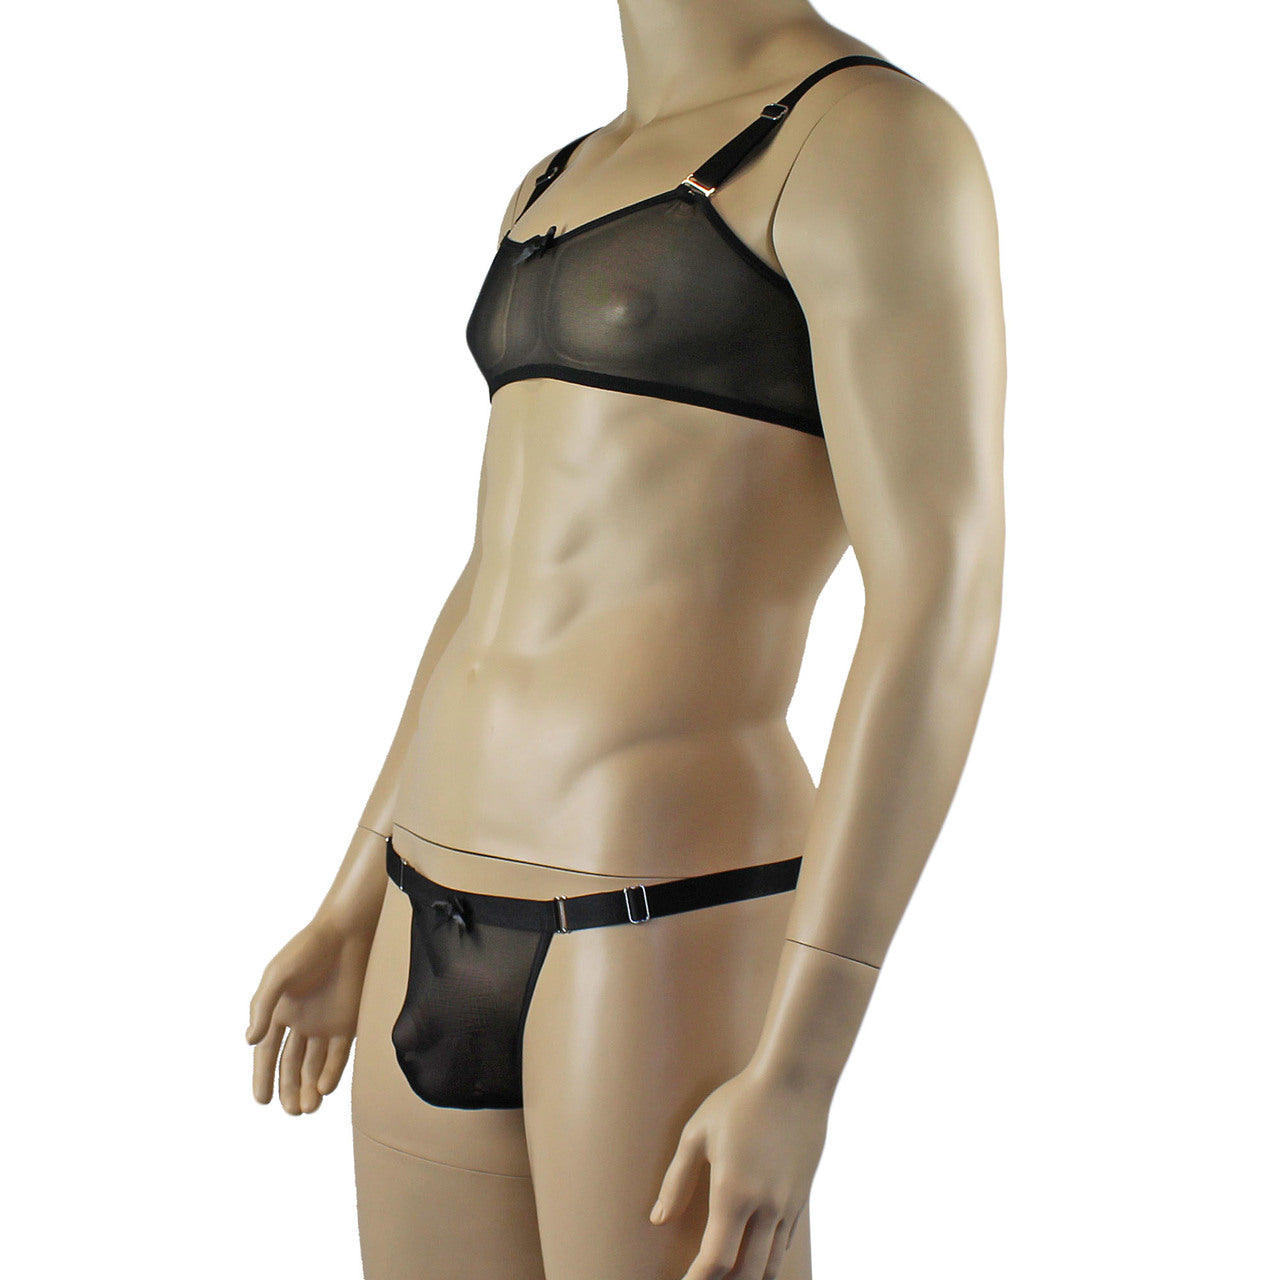 Mens Exotic Sheer Mesh Bra Top & G string - Sizes up to 3XL (black plus other colours)